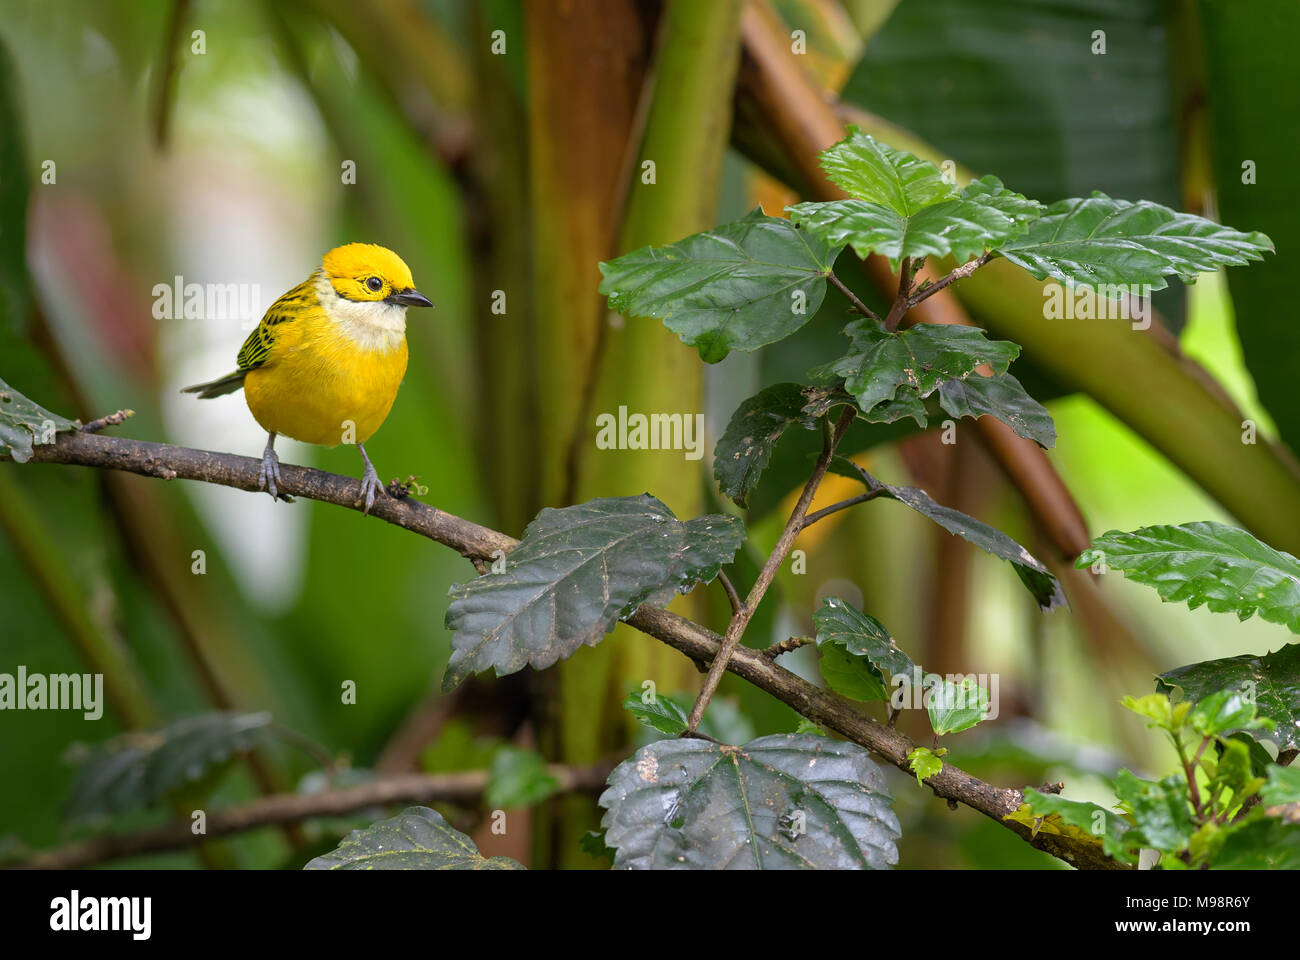 Silver-throated Tanager - Tangara icterocephala, small yellow tanager from Costa Rica. Stock Photo